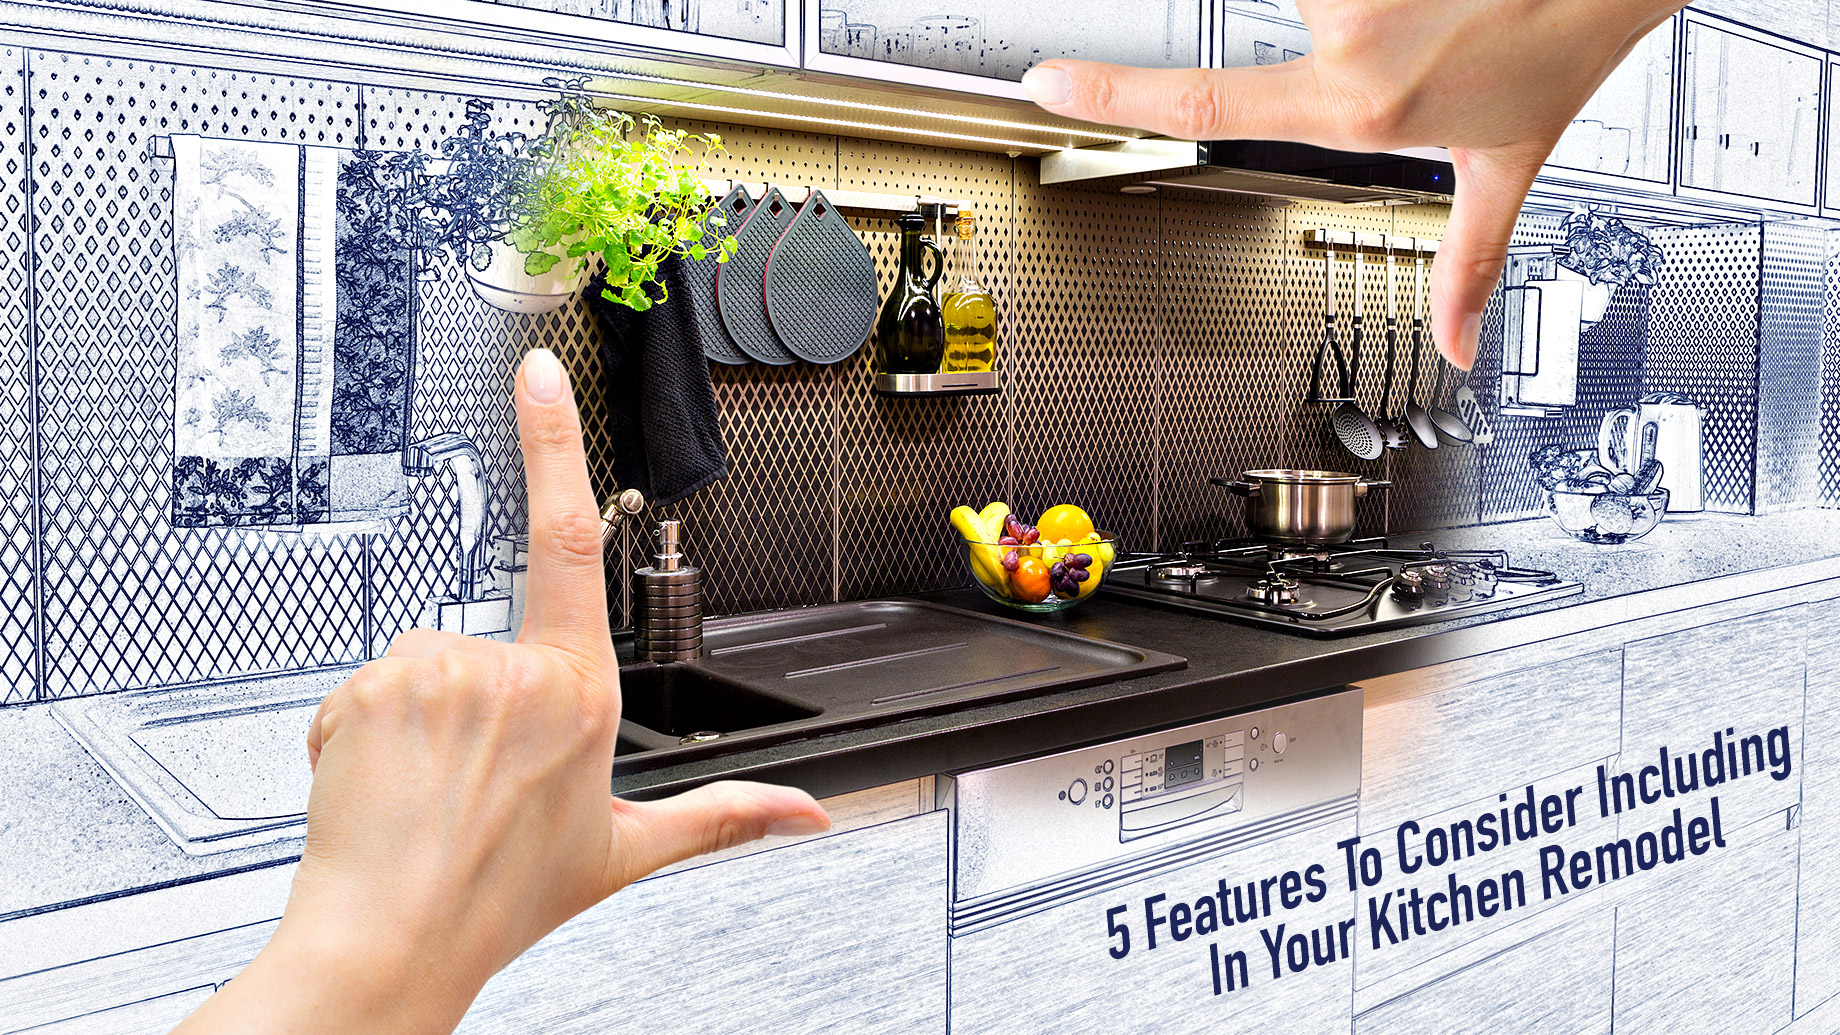 5 Features To Consider Including In Your Kitchen Remodel